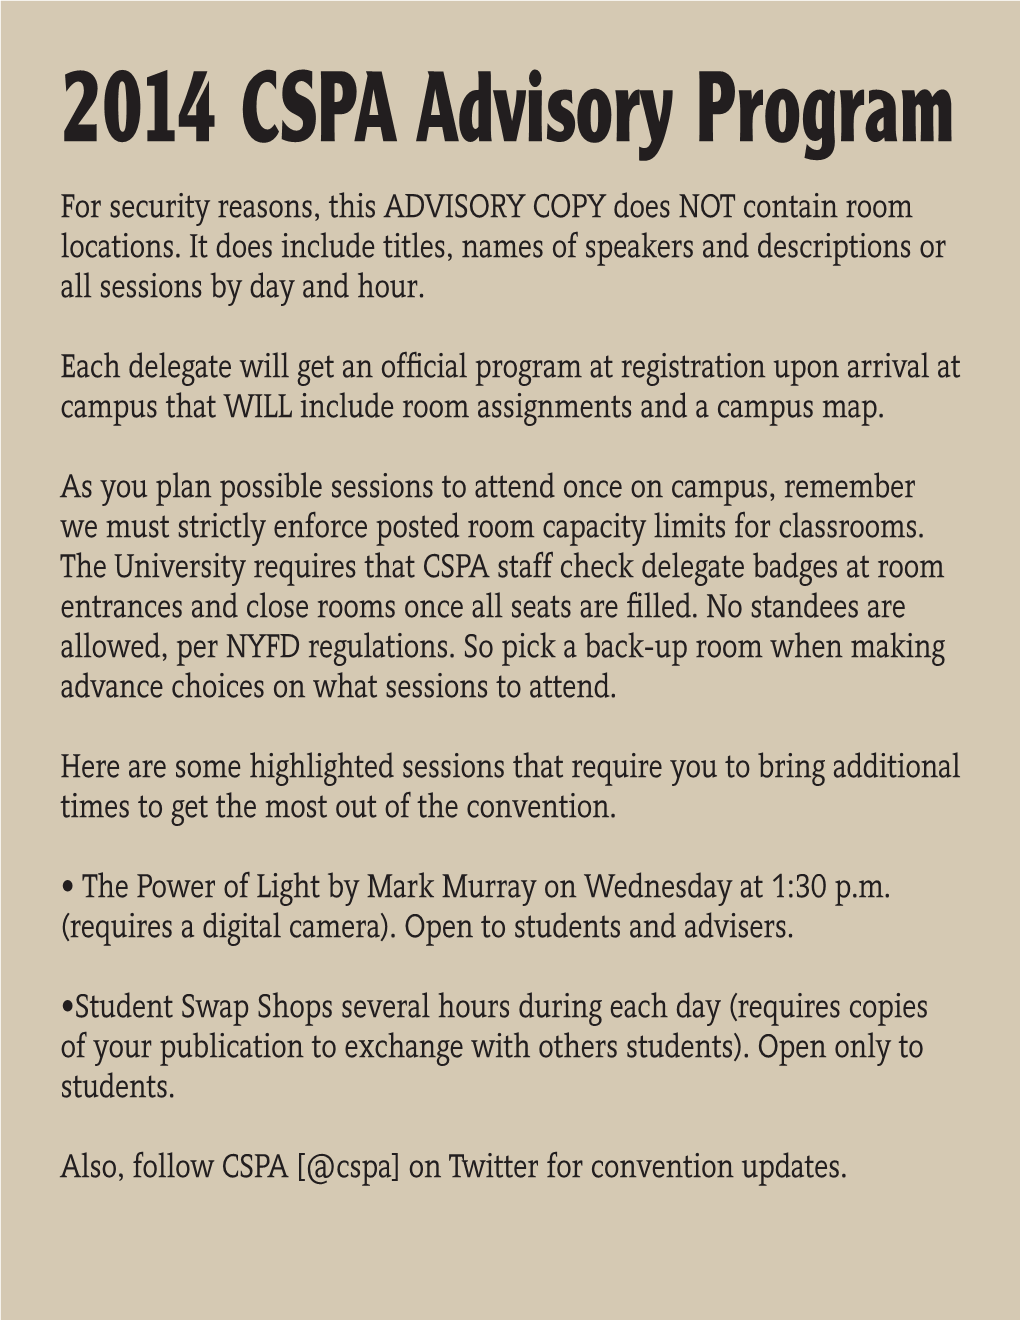 2014 CSPA Advisory Program for Security Reasons, This ADVISORY COPY Does NOT Contain Room Locations